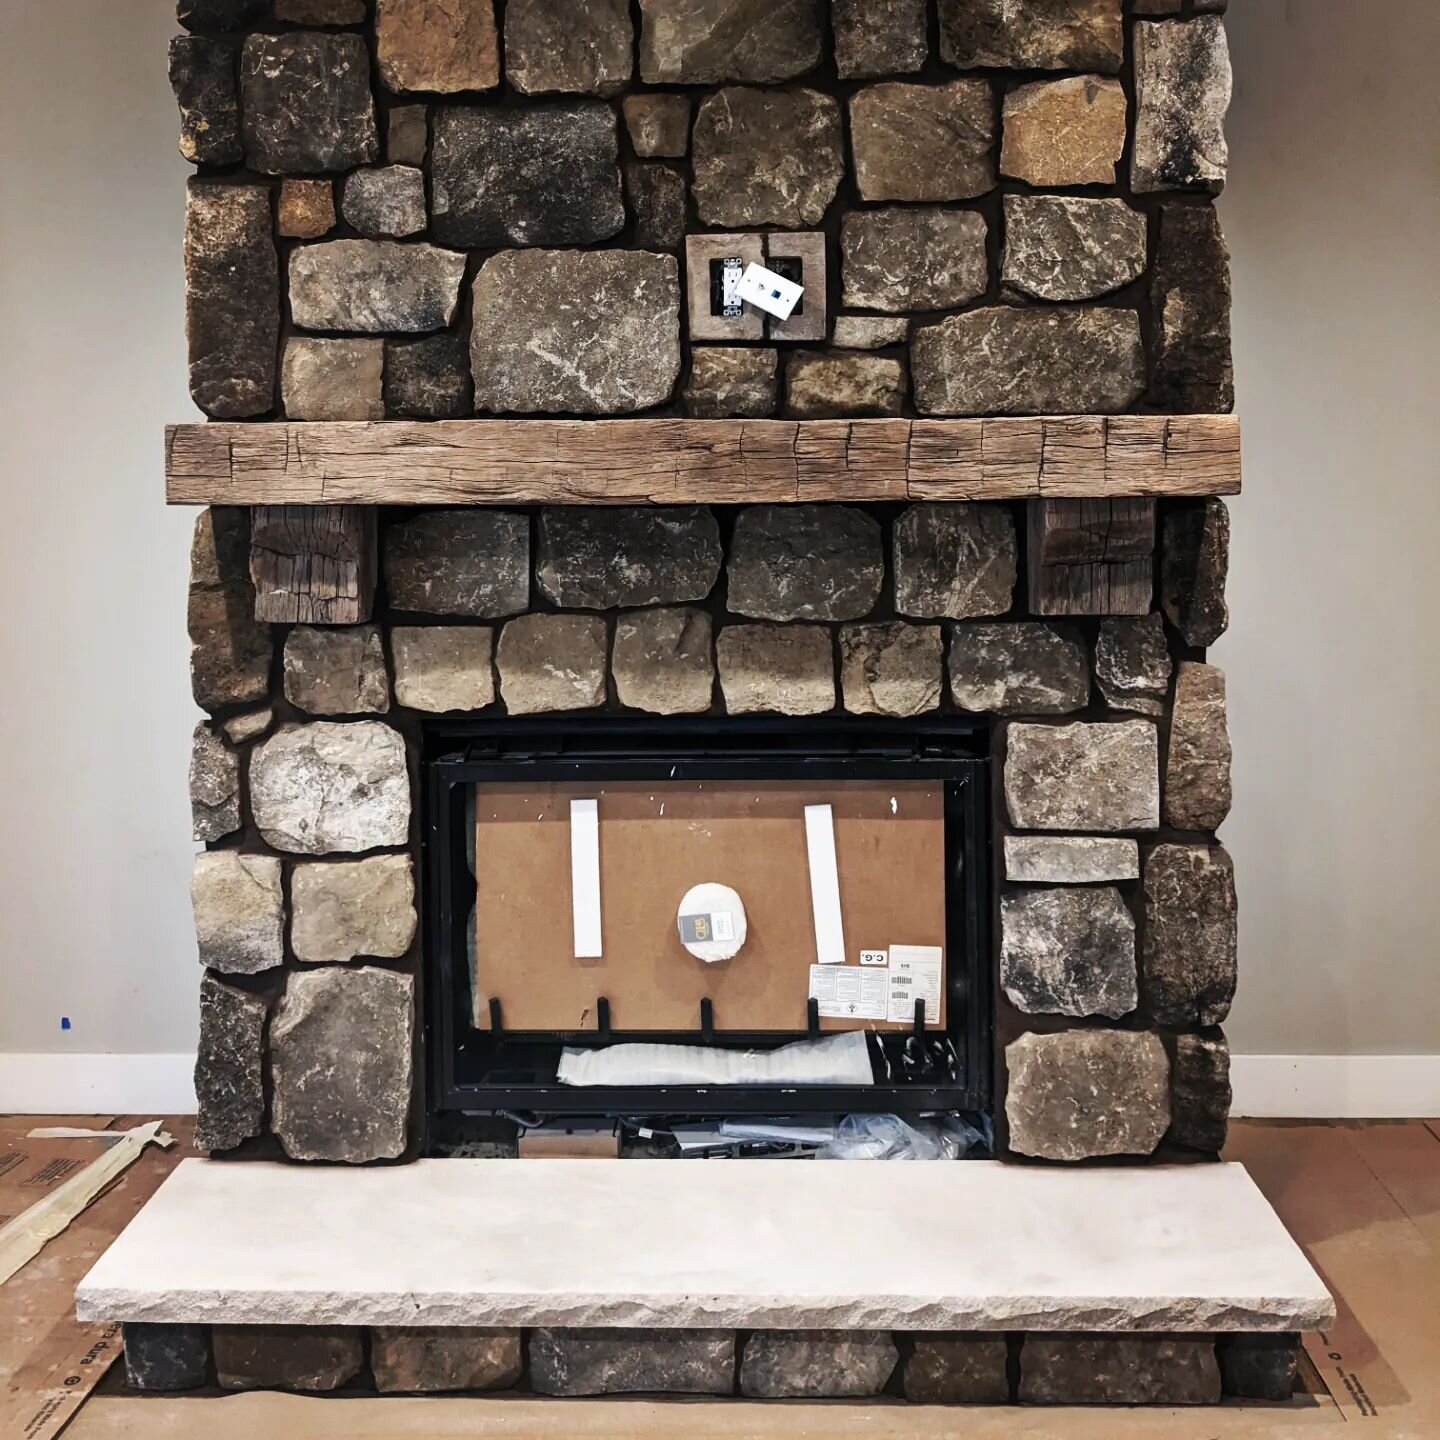 This cozy fireplace was laid with real stone veneer. It's a type of sandstone that has all sorts of contrasting vibrant colors and the dark brown mortar really brings that out.